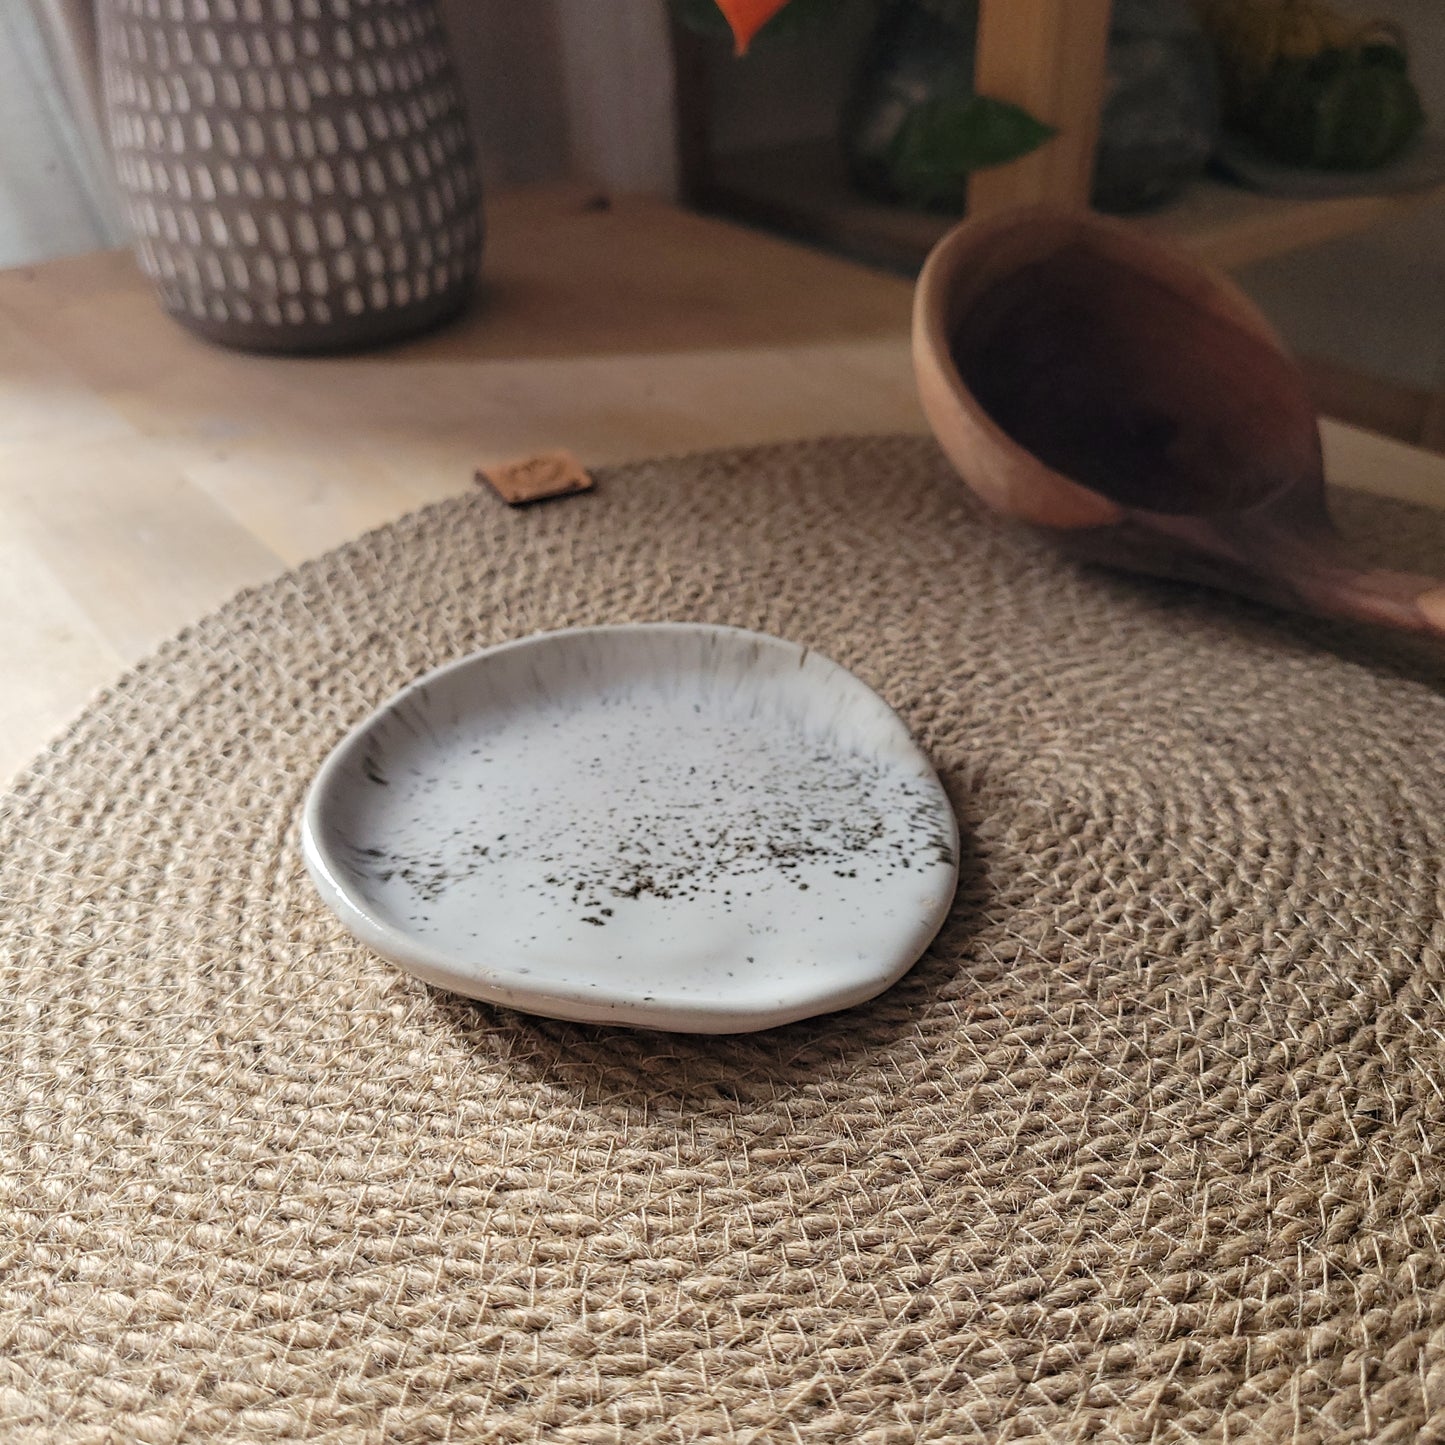 Add a touch of rustic charm to your kitchen with this handmade spoon rest.